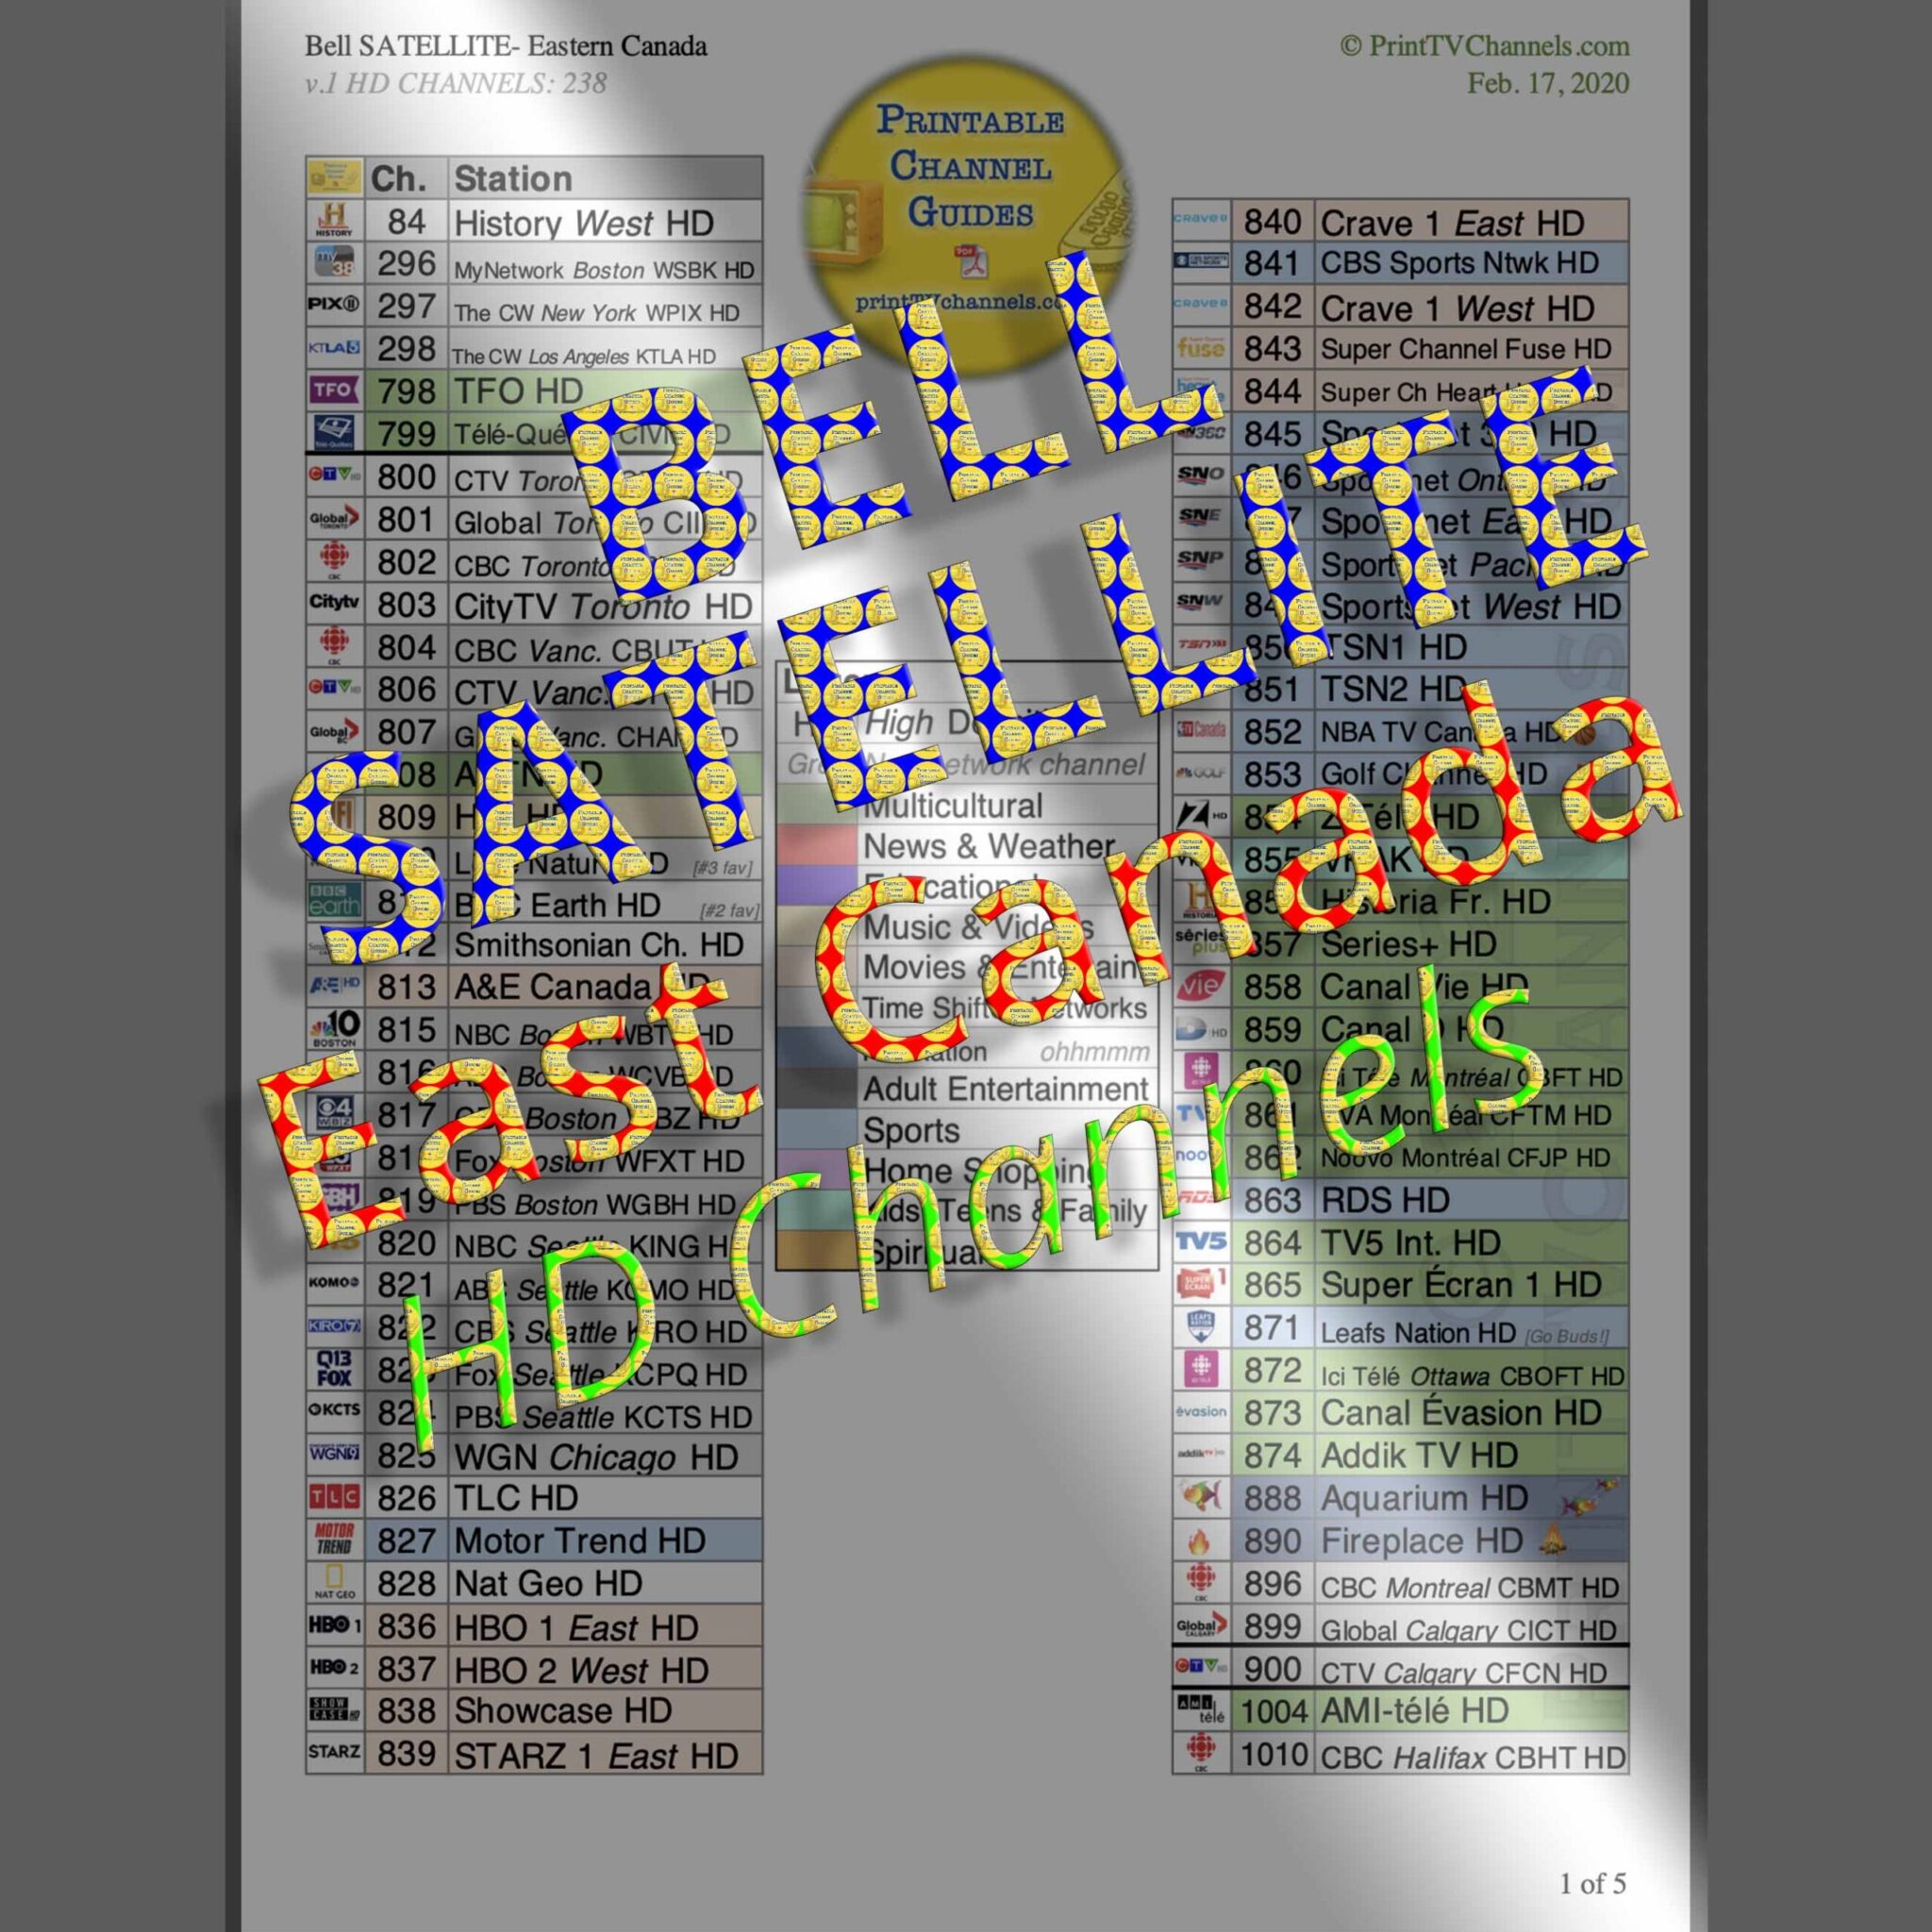 Preview Image: Bell Satellite TV Channel Listings | EASTERN Canada | HD Channels